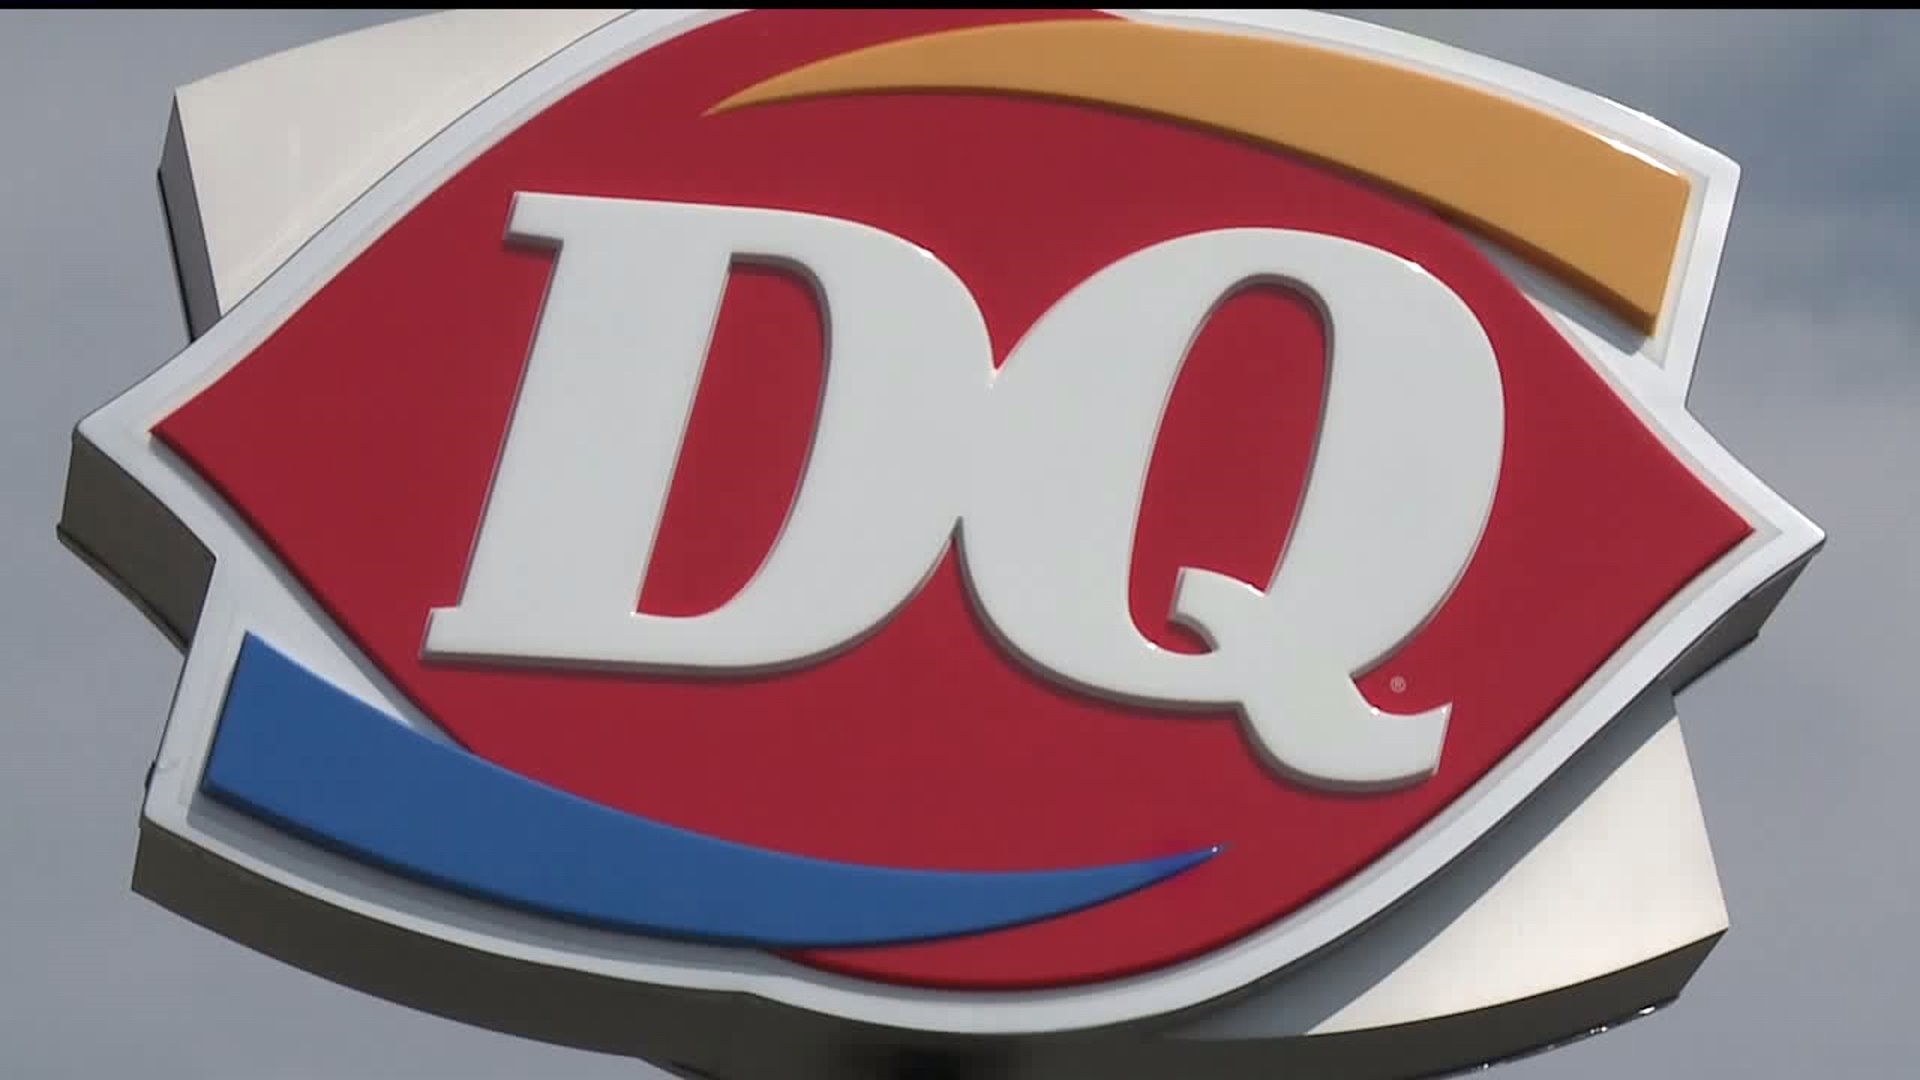 Dairy Queen gives out free ice cream cones